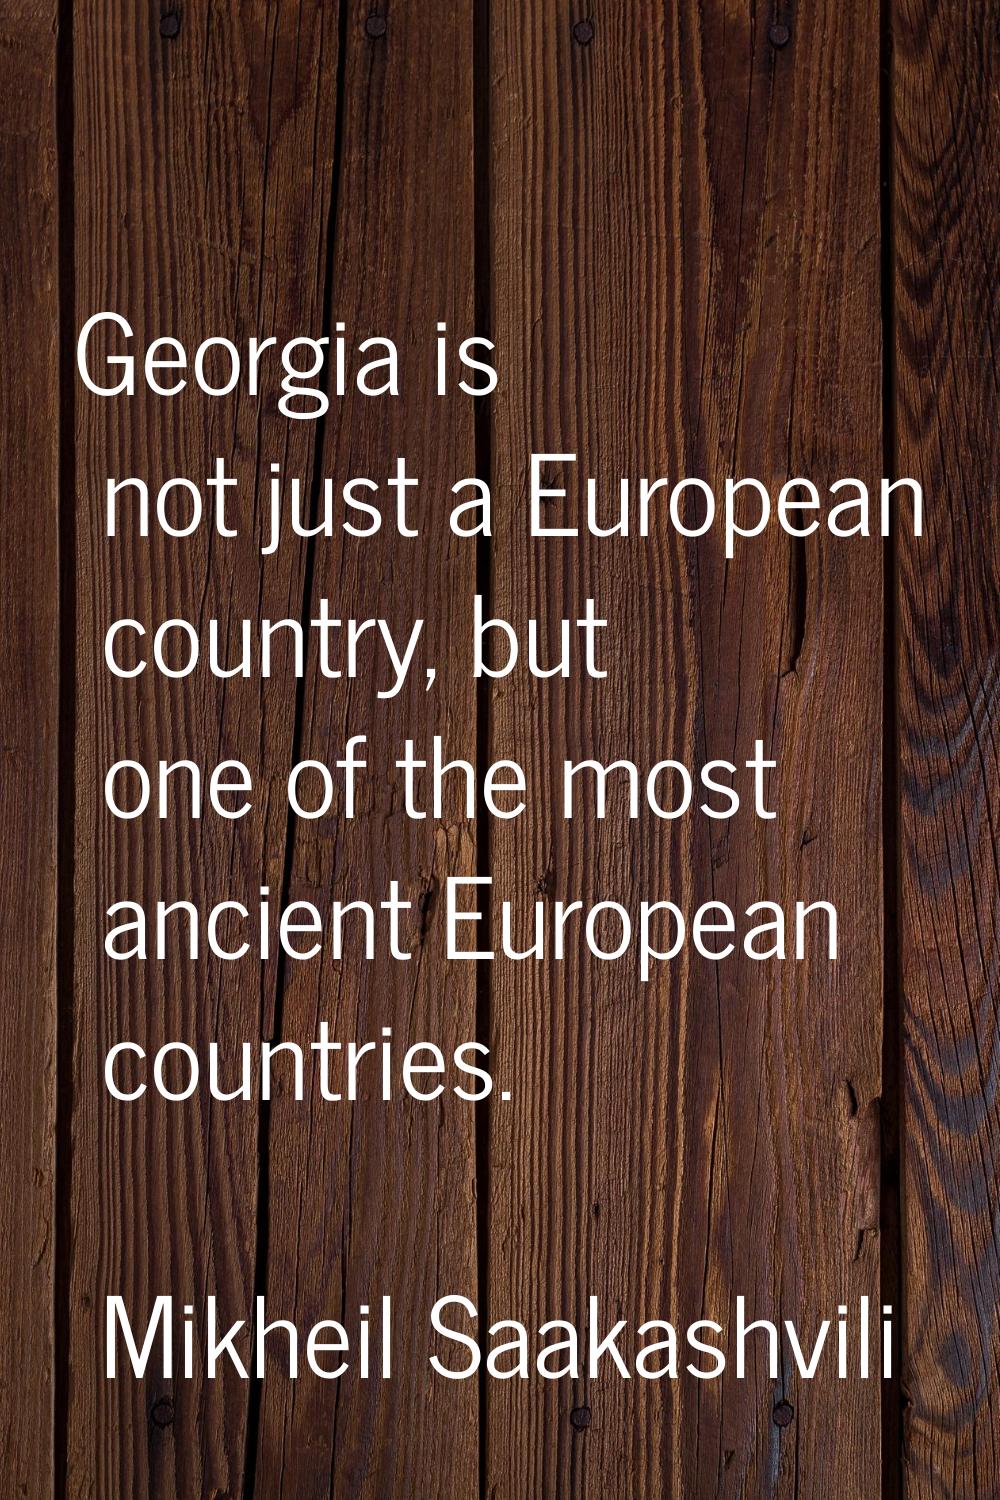 Georgia is not just a European country, but one of the most ancient European countries.